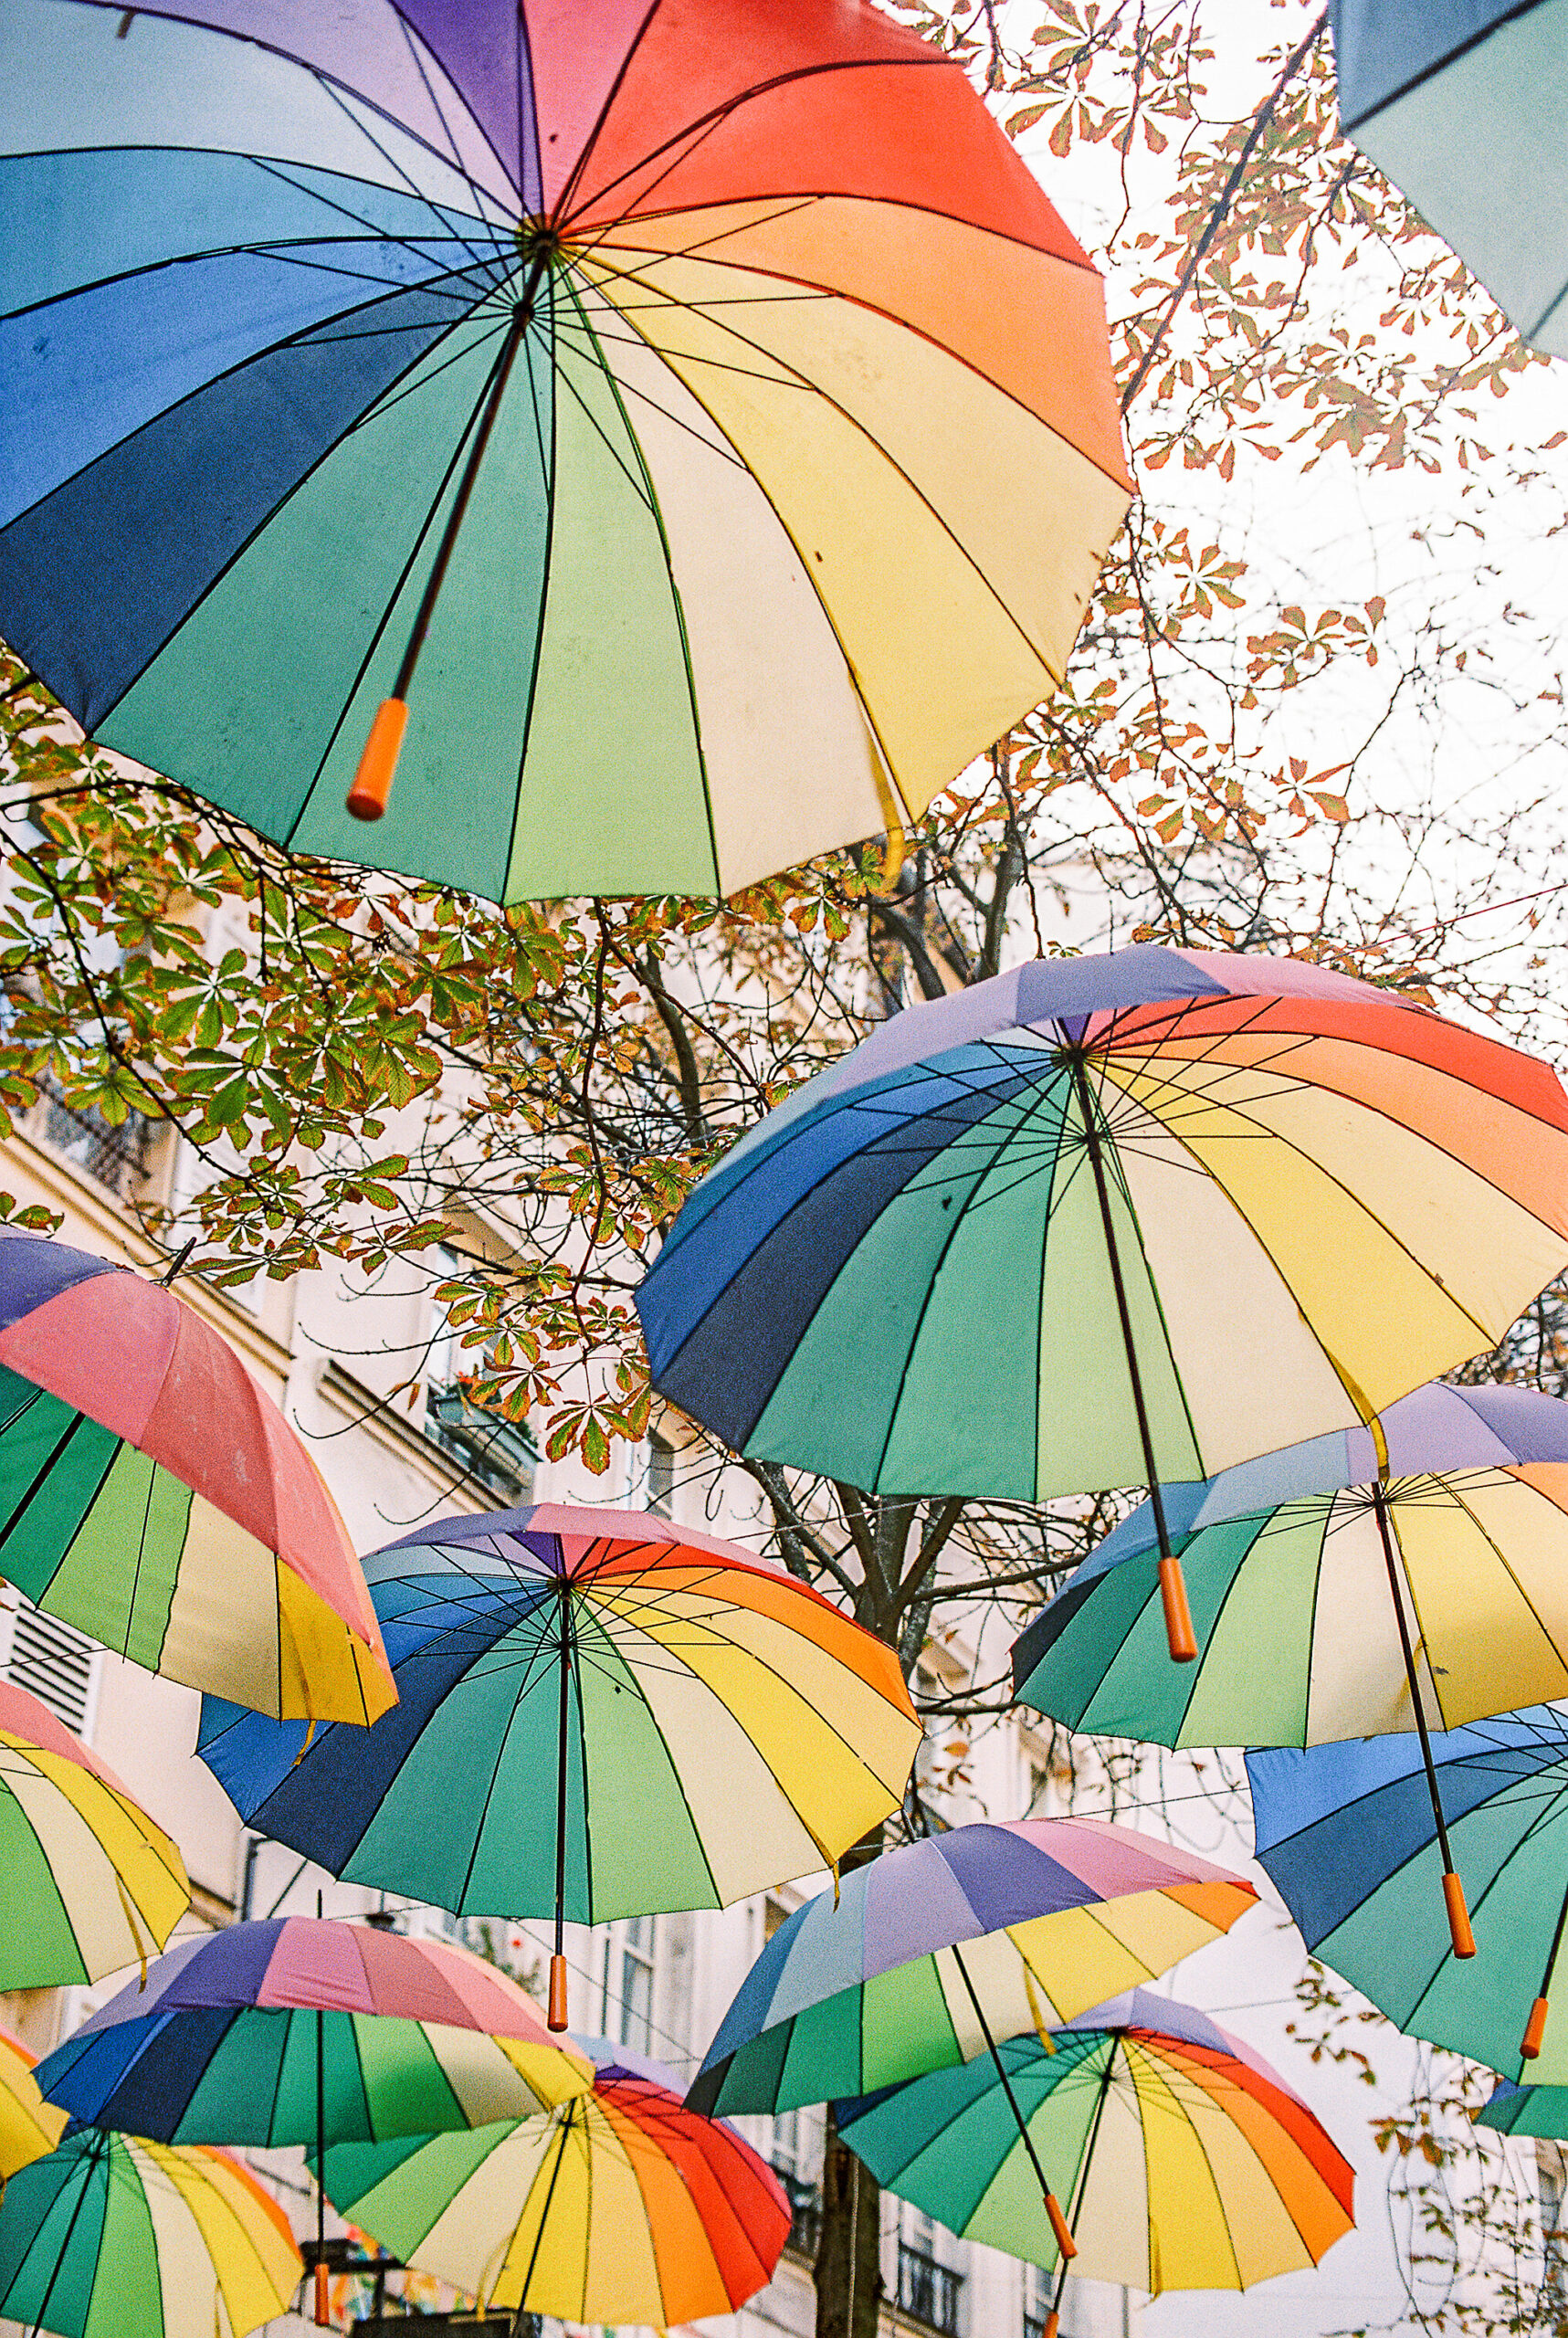 Streets of Paris France with rainbow colored umbrellas in a canopy over the sidewalk